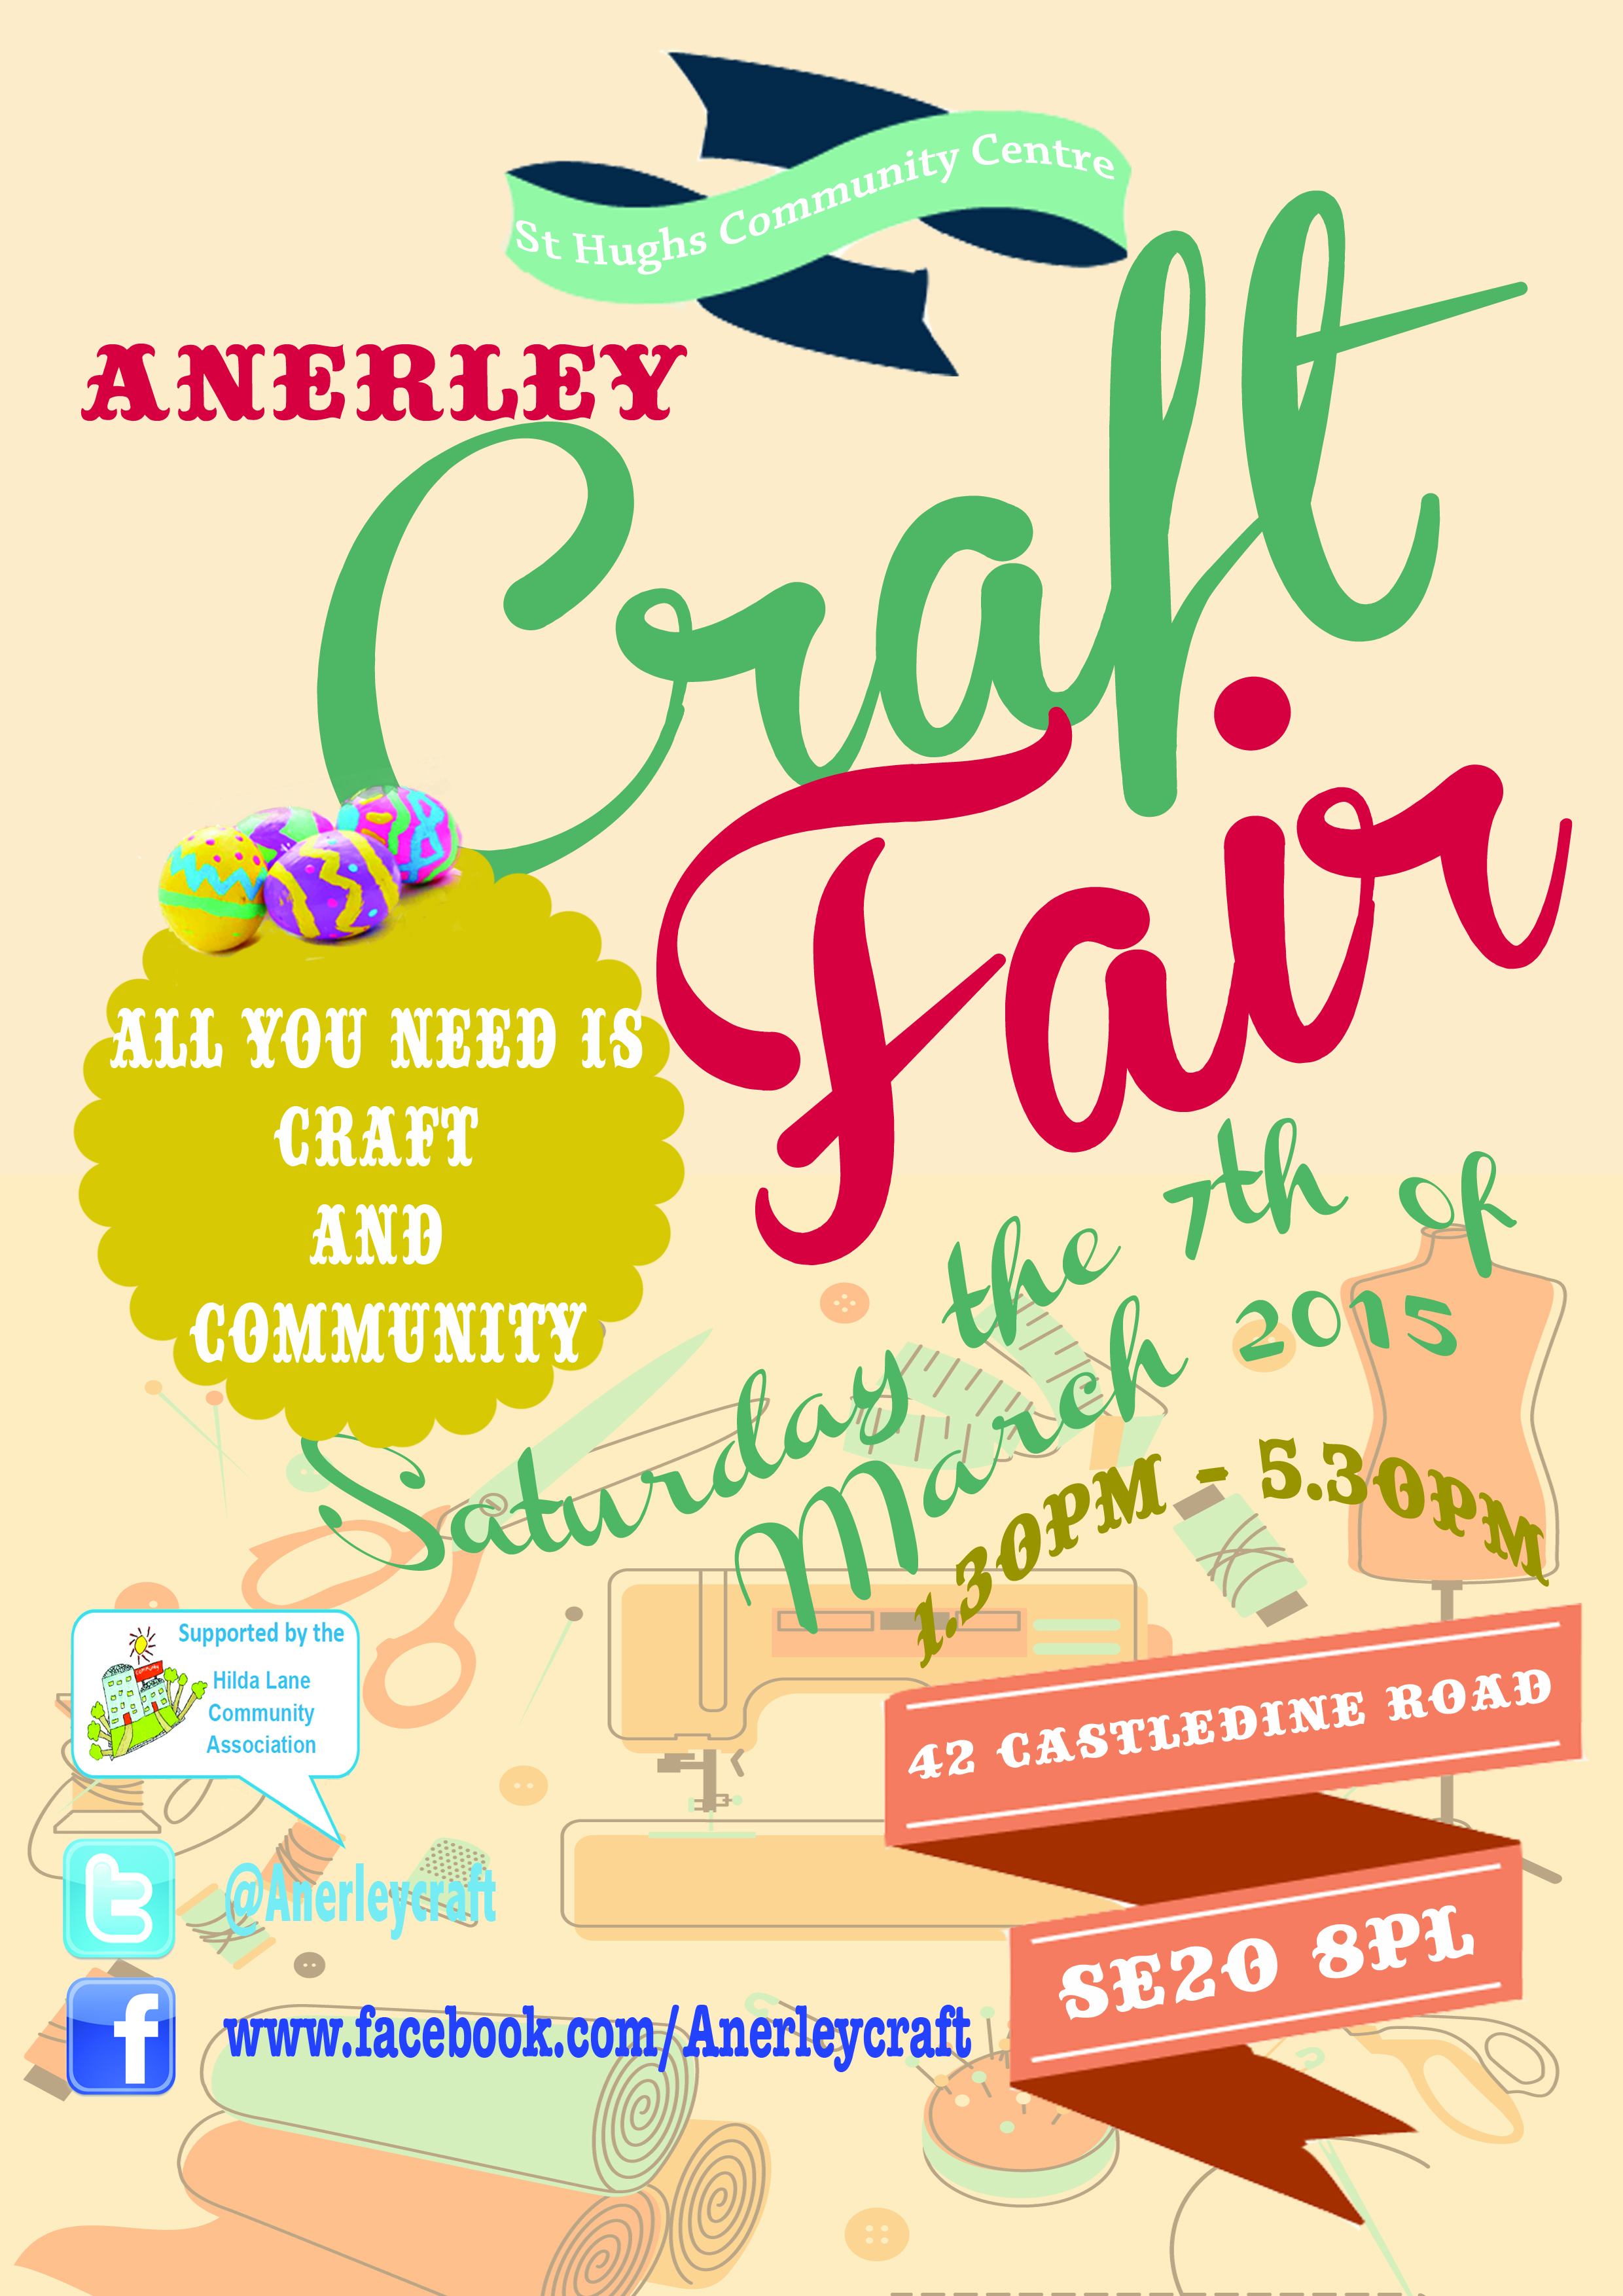 Anerley Craft Mothers Day and Easter Fair - Saturday 7th March 2015